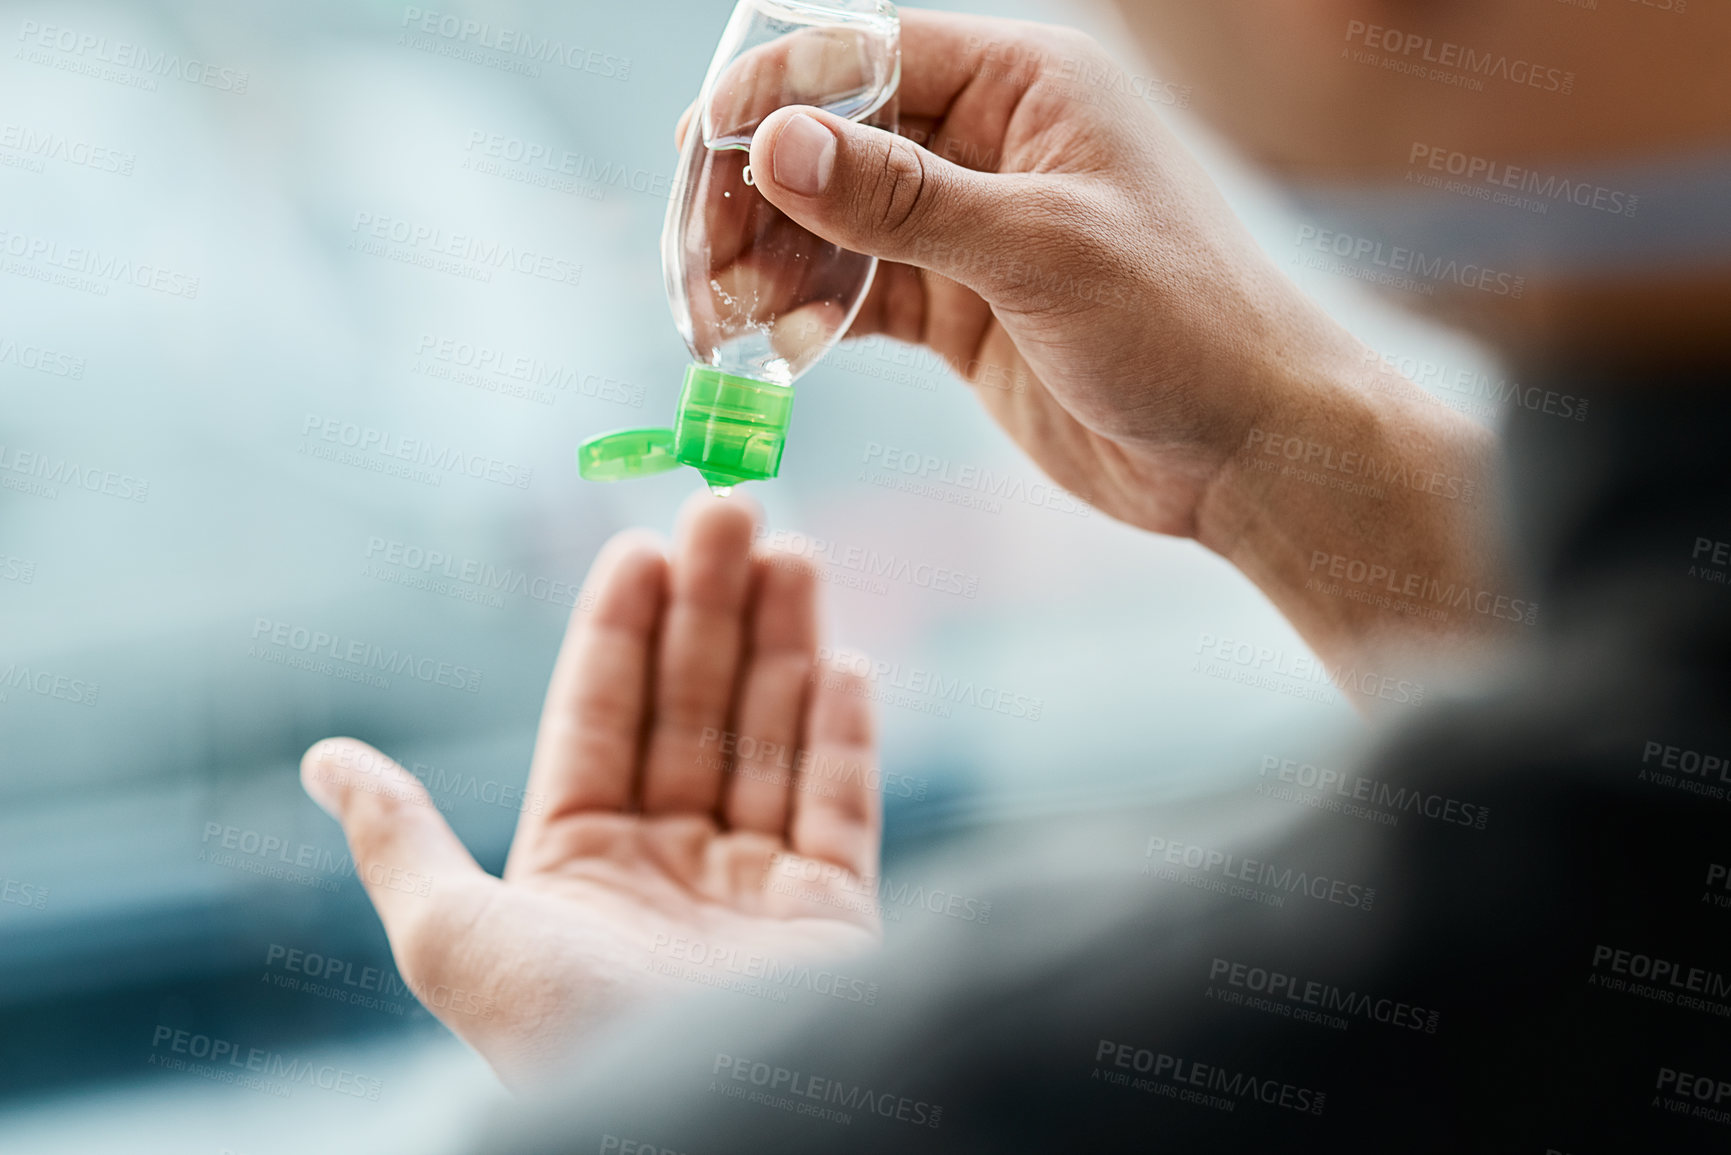 Buy stock photo Cropped shot of a businessman using hand sanitiser to disinfect his hands